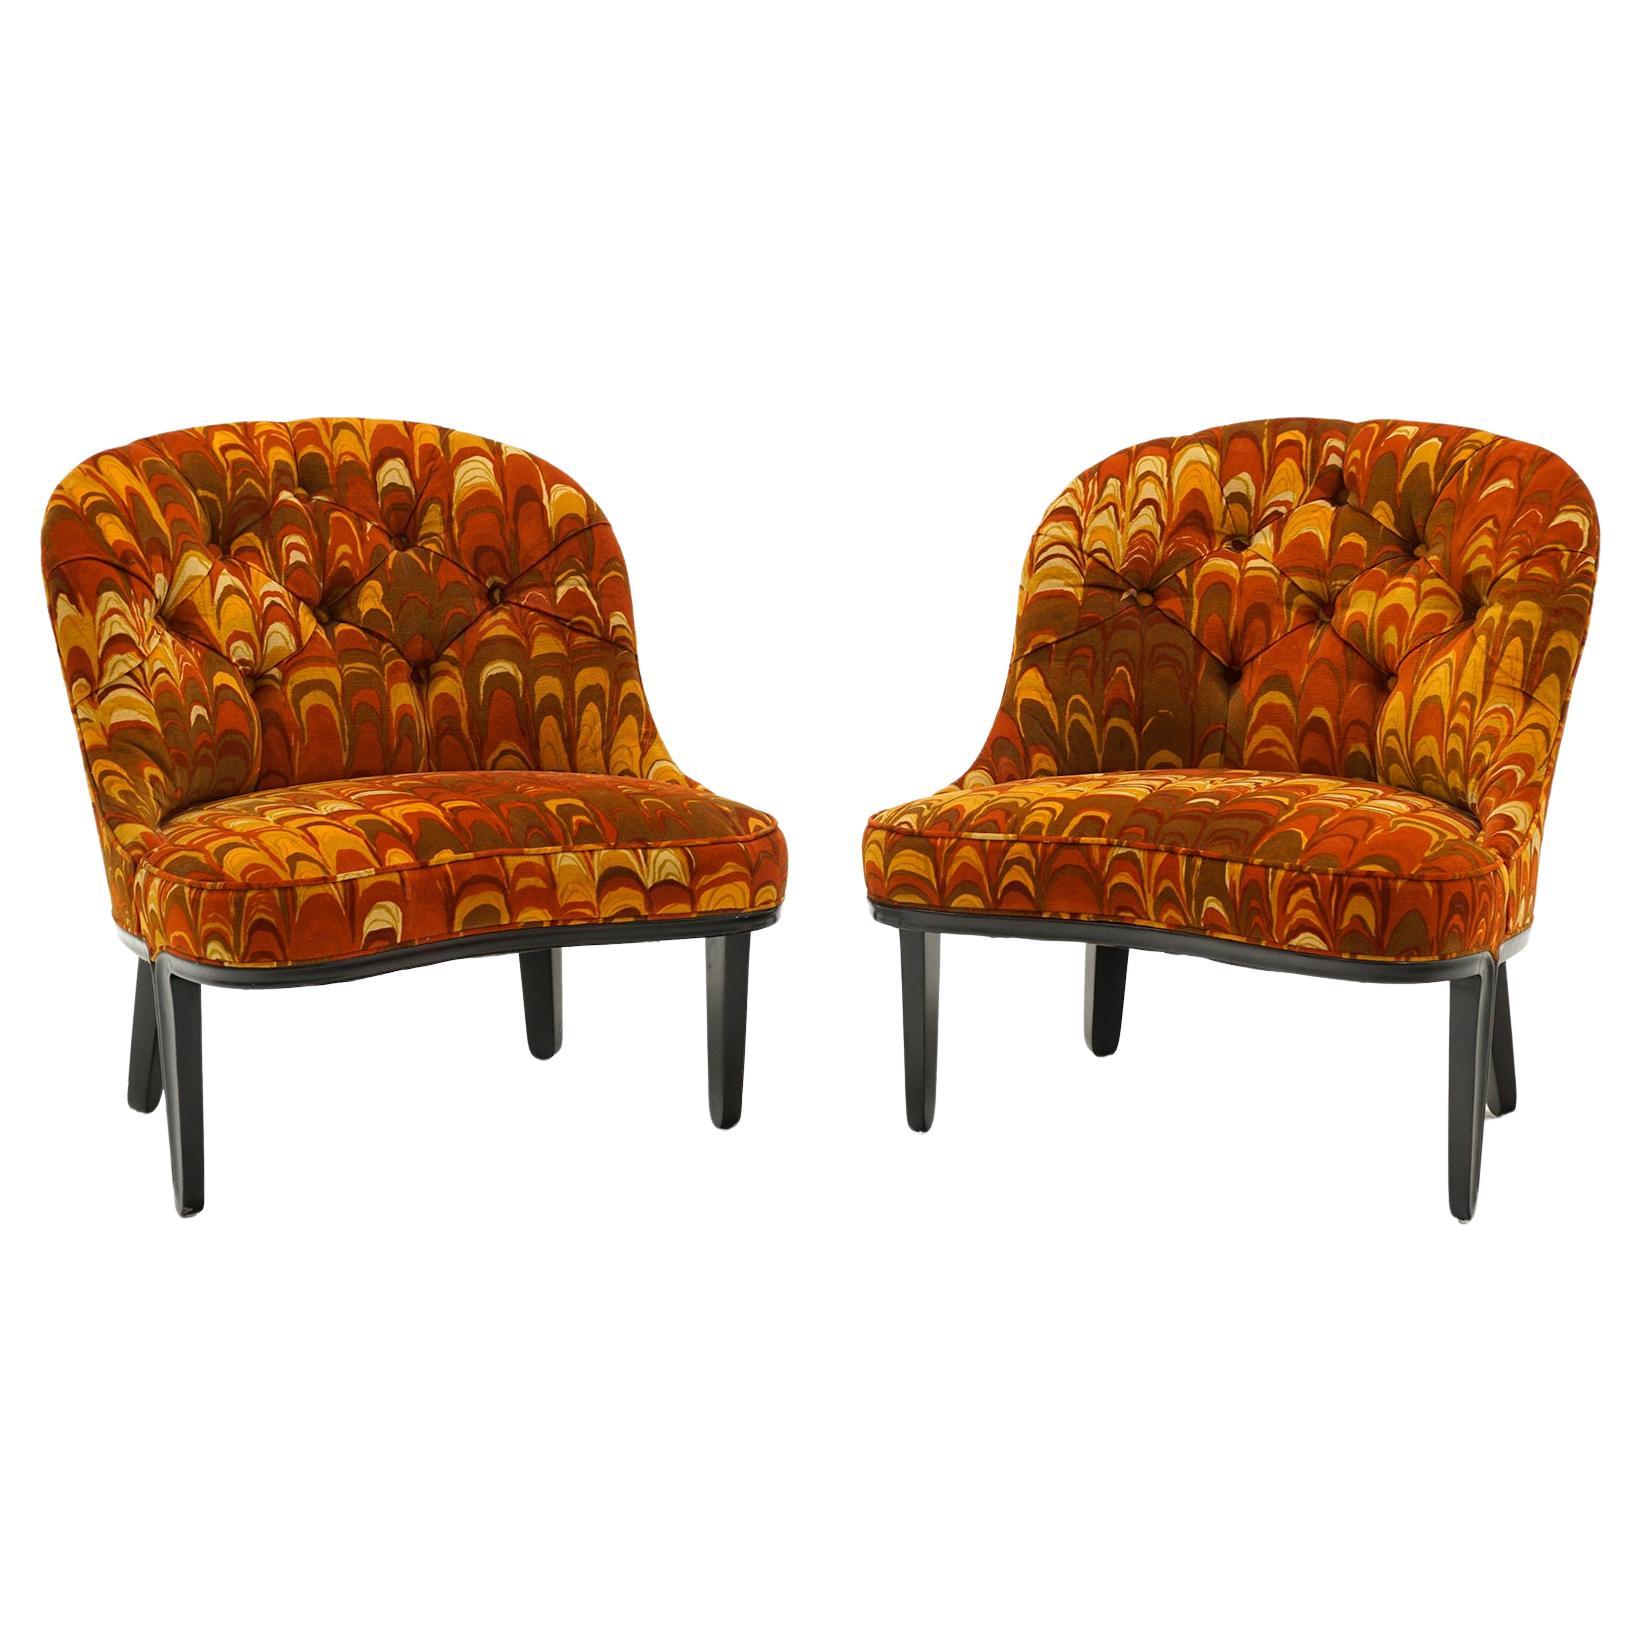 Pair Armless Janus Chairs by Edward Wormley. Rare orangeJack Lenor Larsen Fabric For Sale